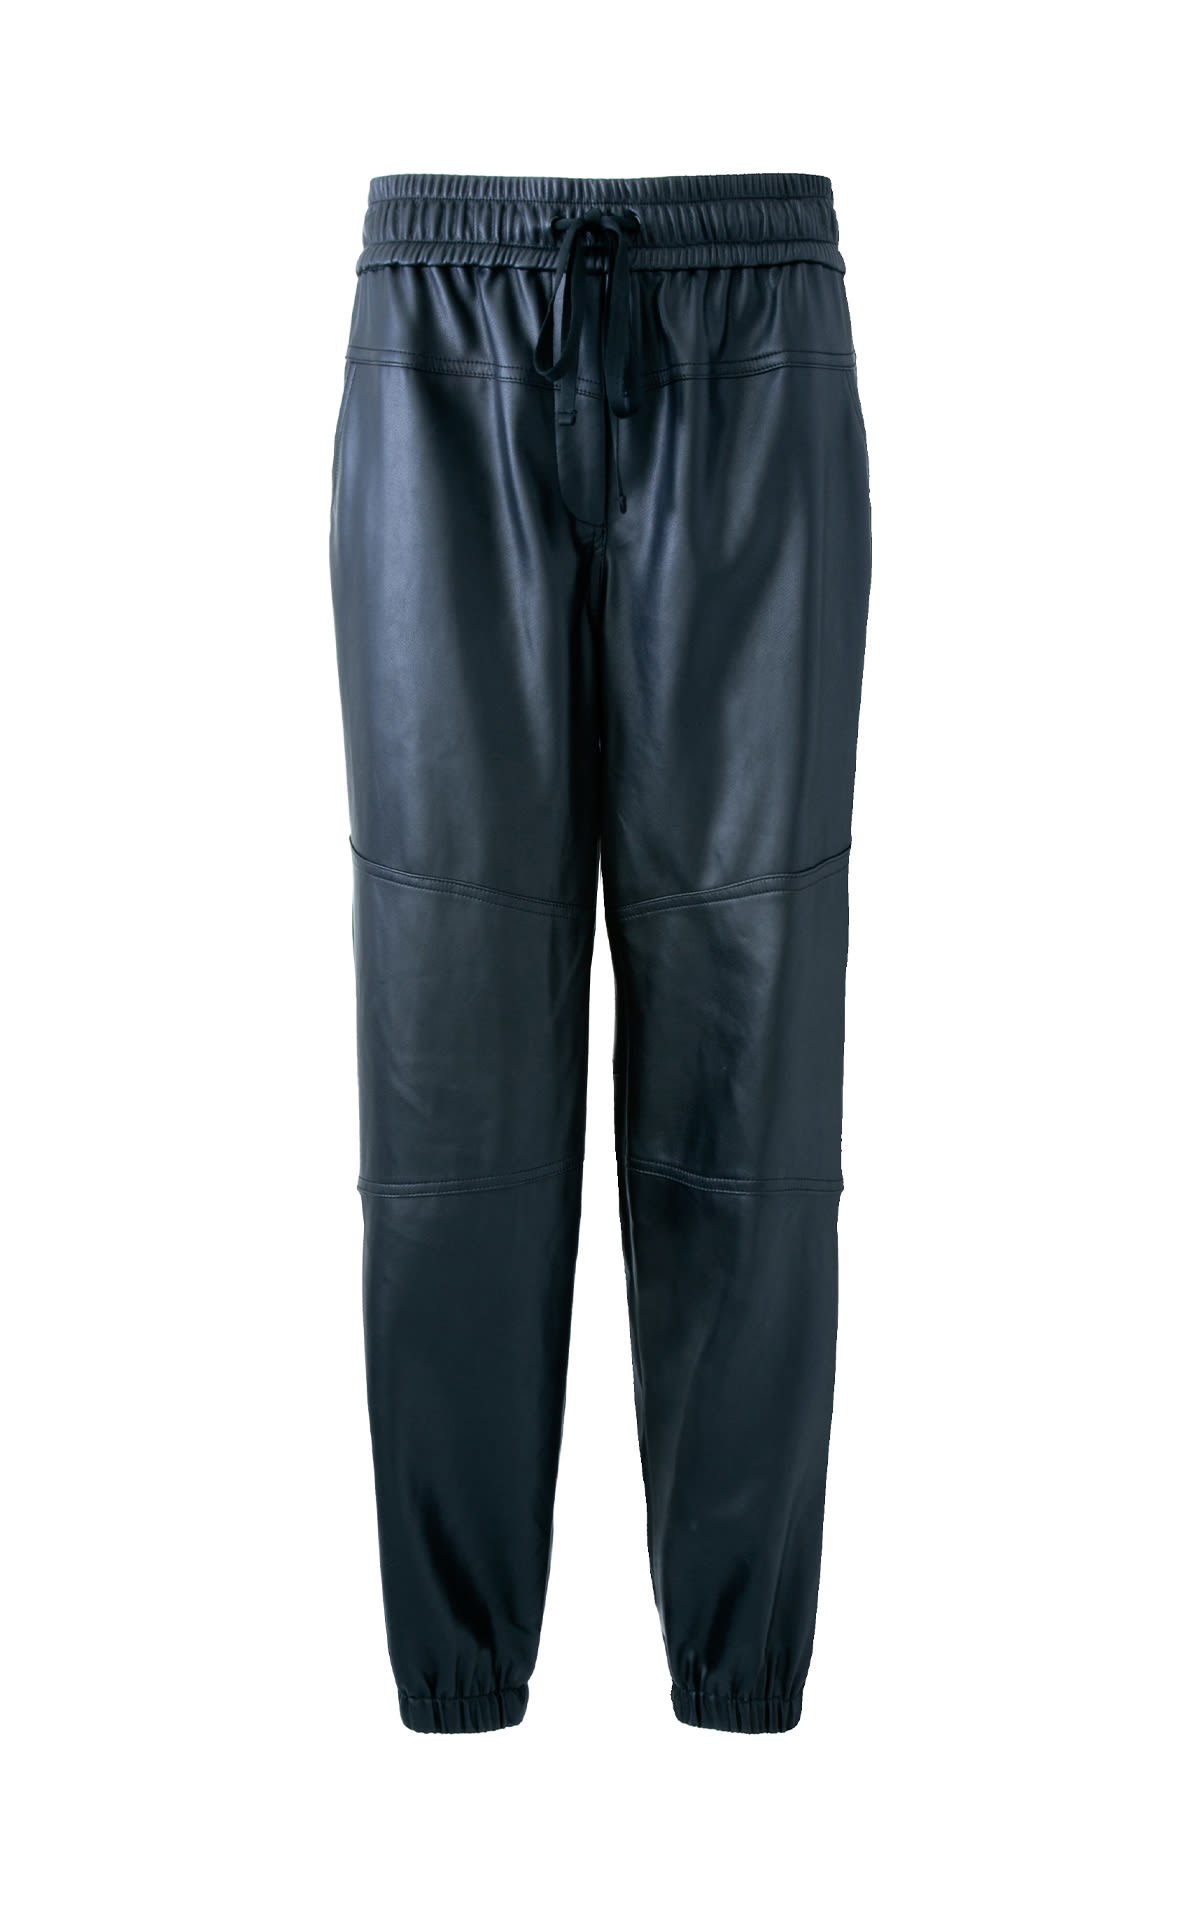 DKNY Vegan leather joggers from Bicester Village